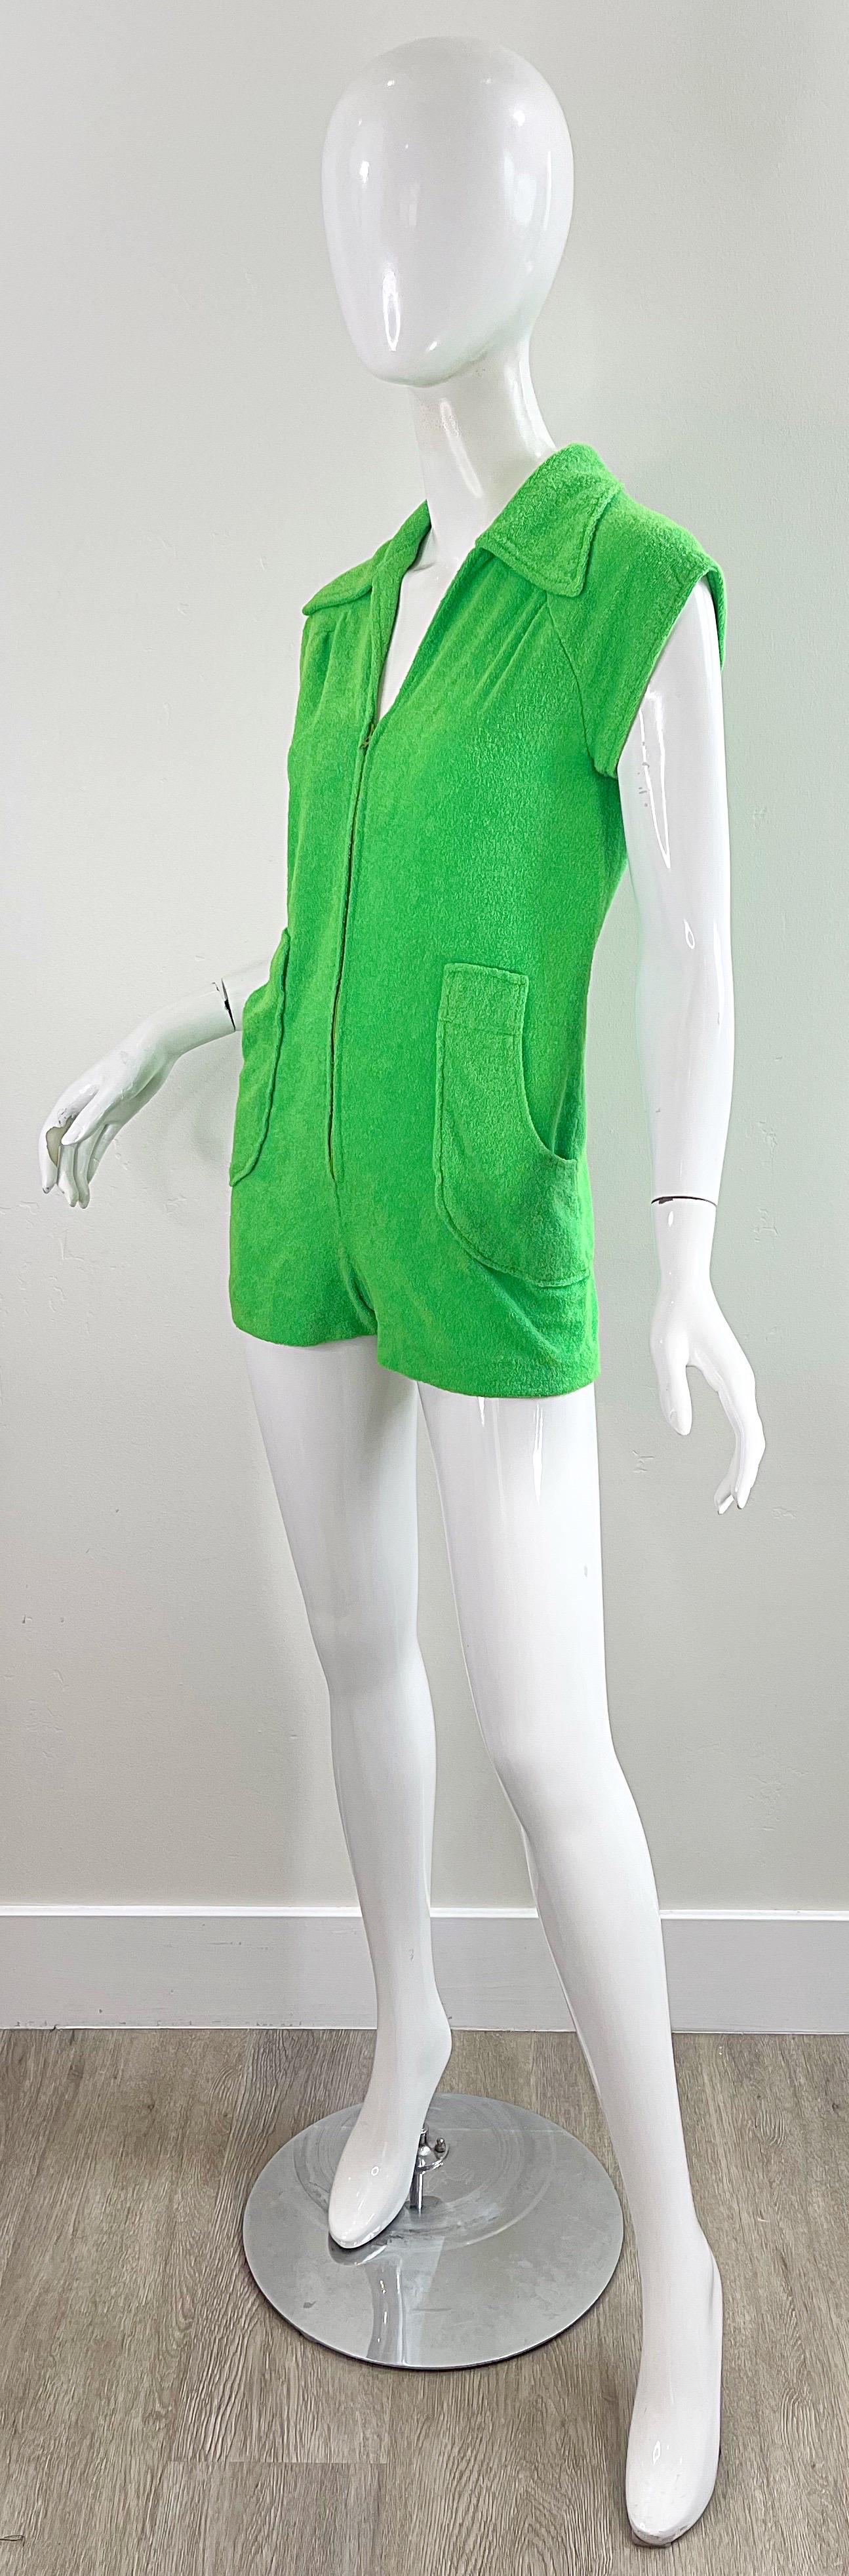 Amazing 1970s Terrycloth Neon Green Romper Vintage 70s Shorts Jumpsuit In Excellent Condition For Sale In San Diego, CA